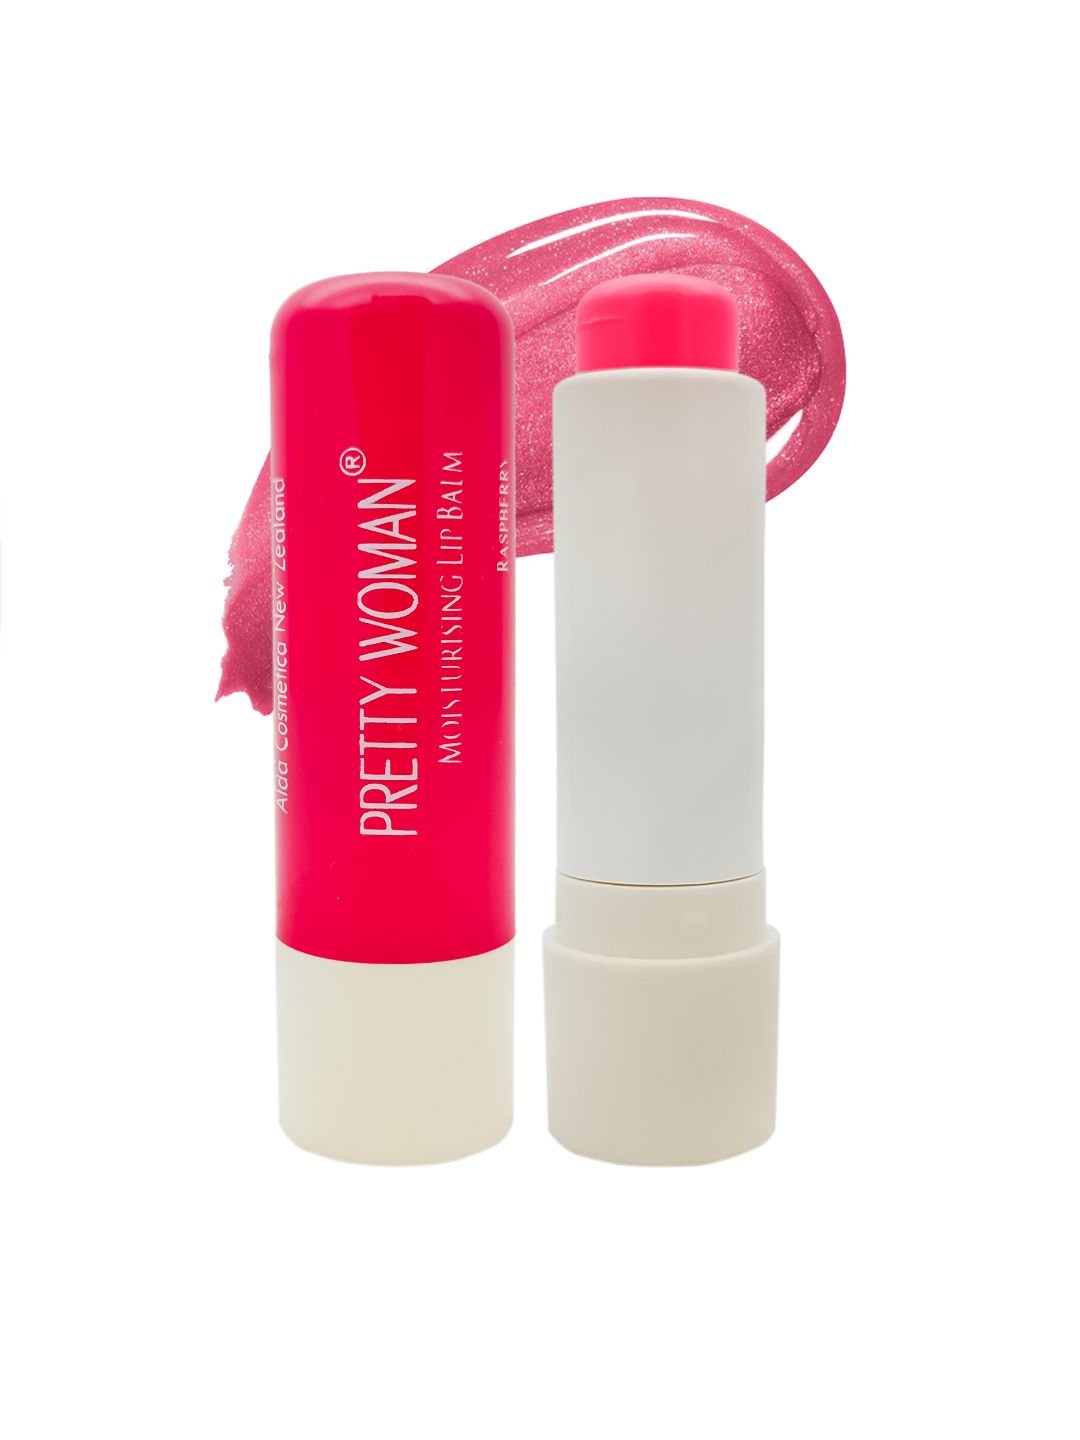 Pretty Woman Moisturizing Raspberry Tinted Lip Balm for Dry & Chapped Lips Price in India